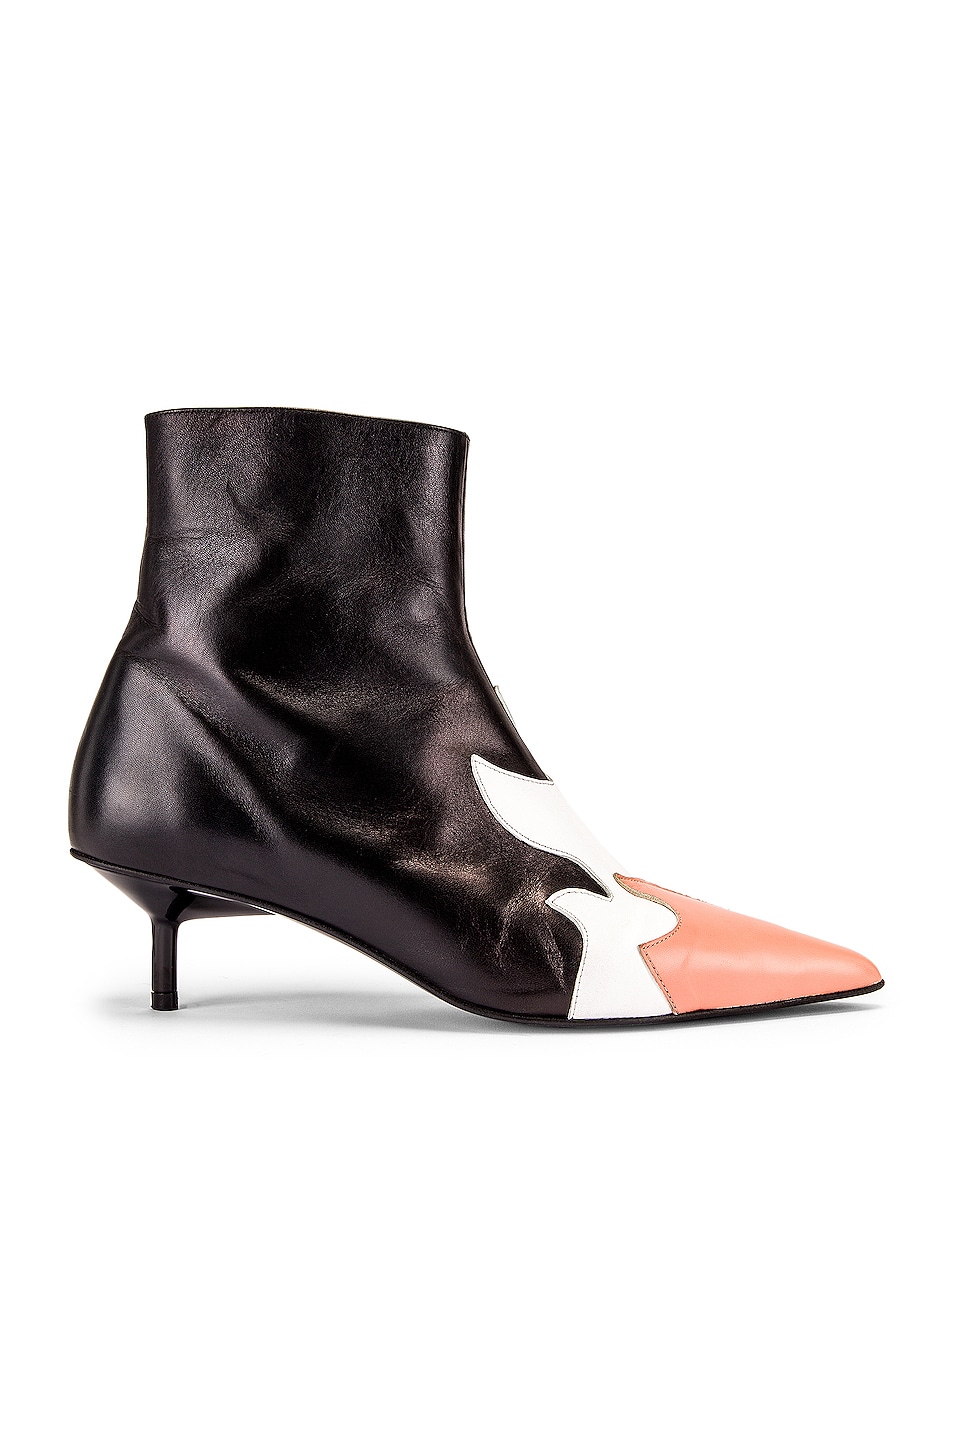 Image 1 of Marques ' Almeida Pointy Kitten Heel Flame Boot in Black, White & Pink